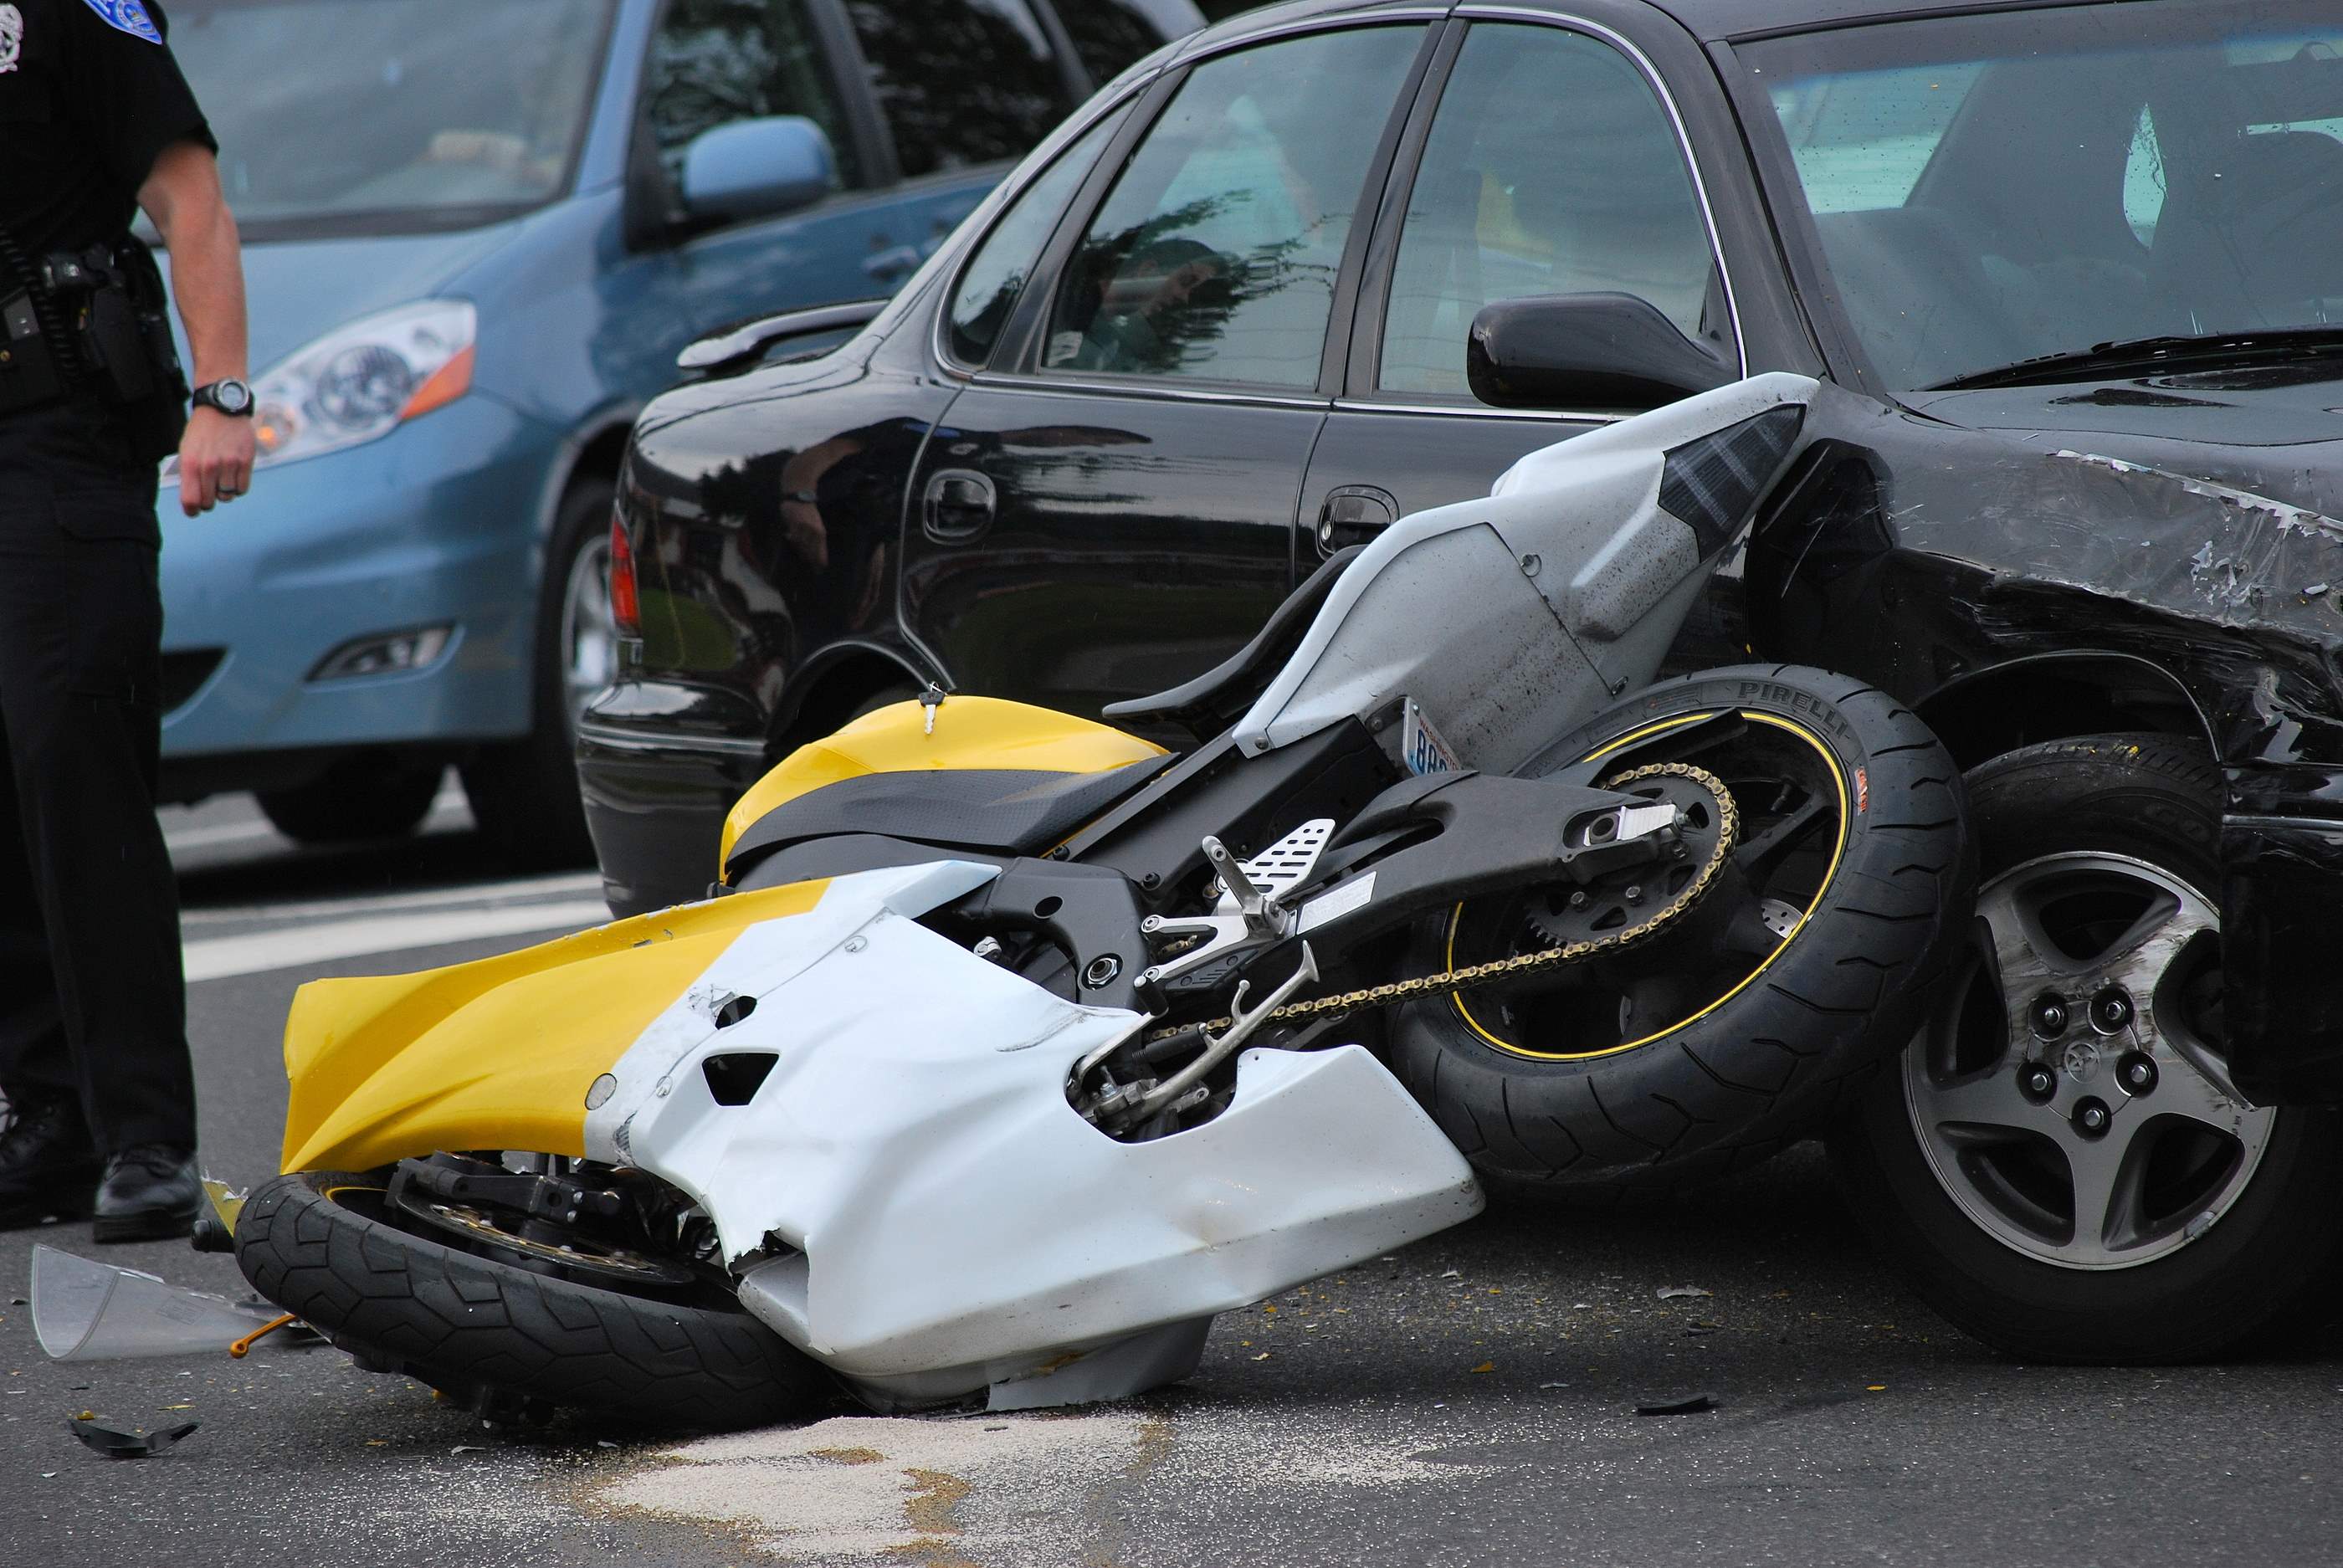 Available Damages After a Motorcycle Accident